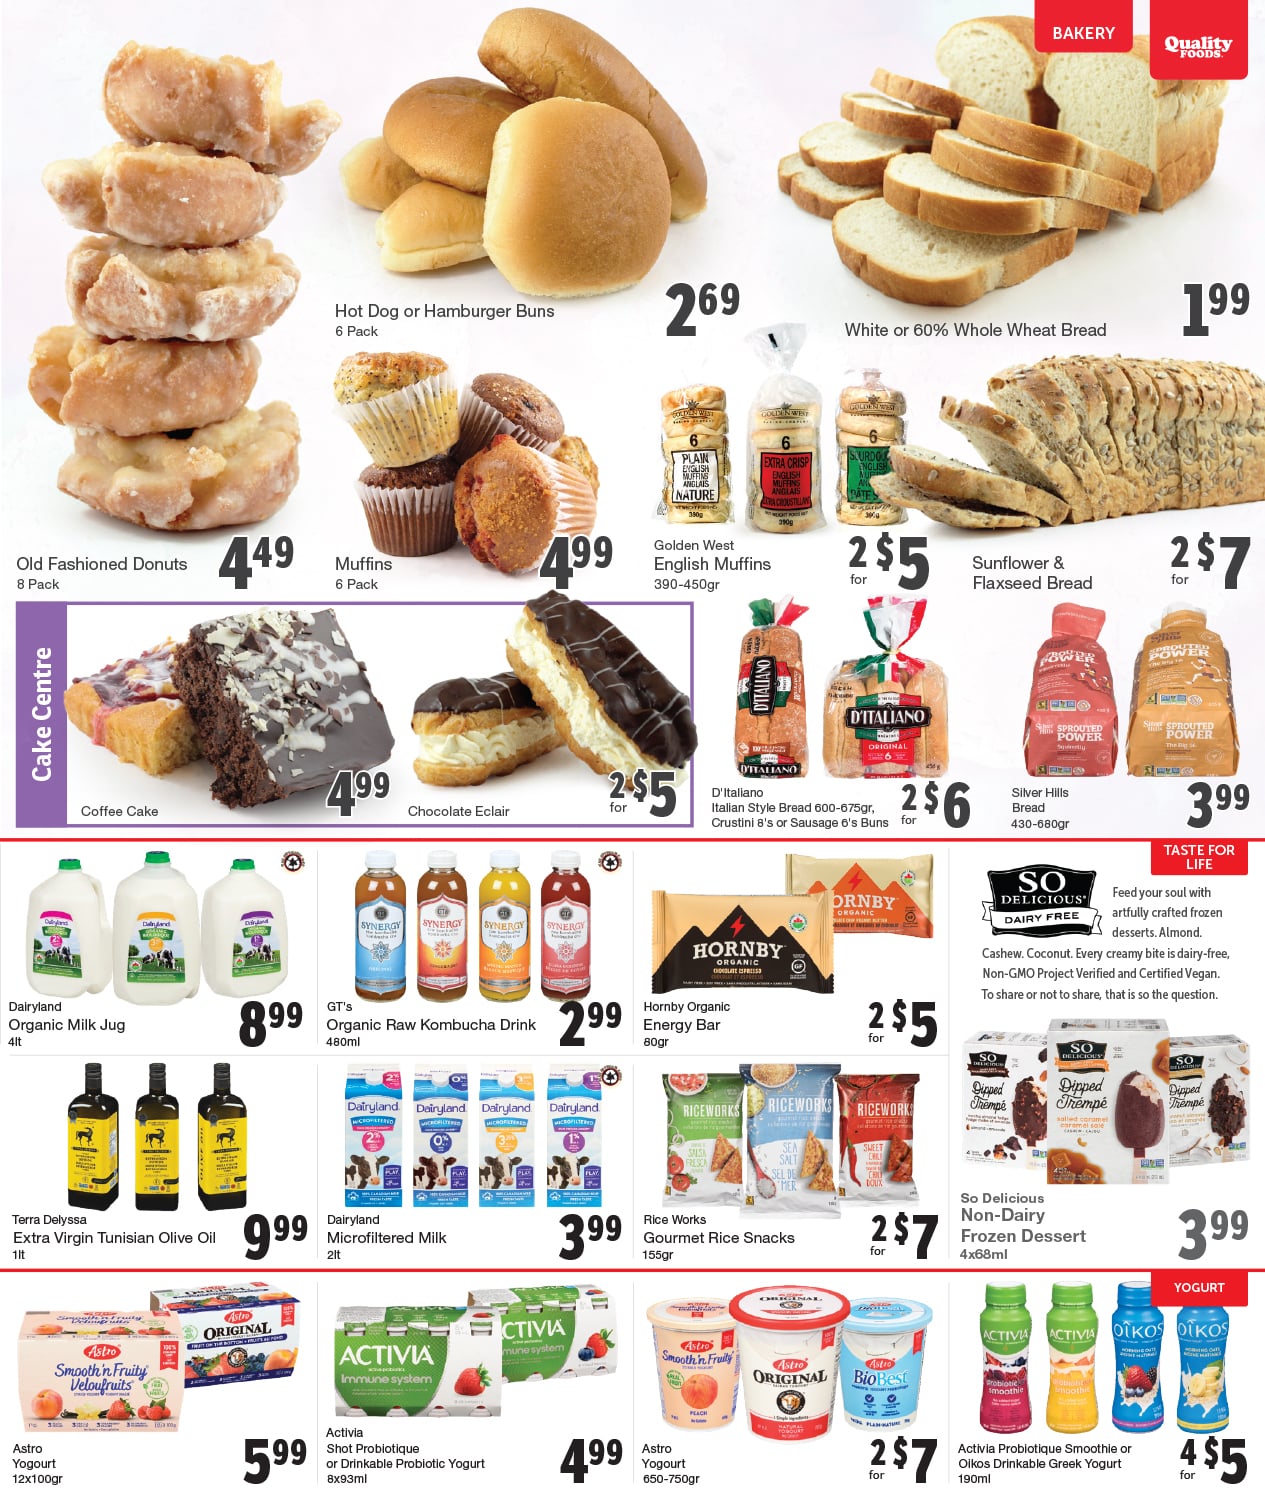 Quality Foods - Weekly Flyer Specials - Page 8